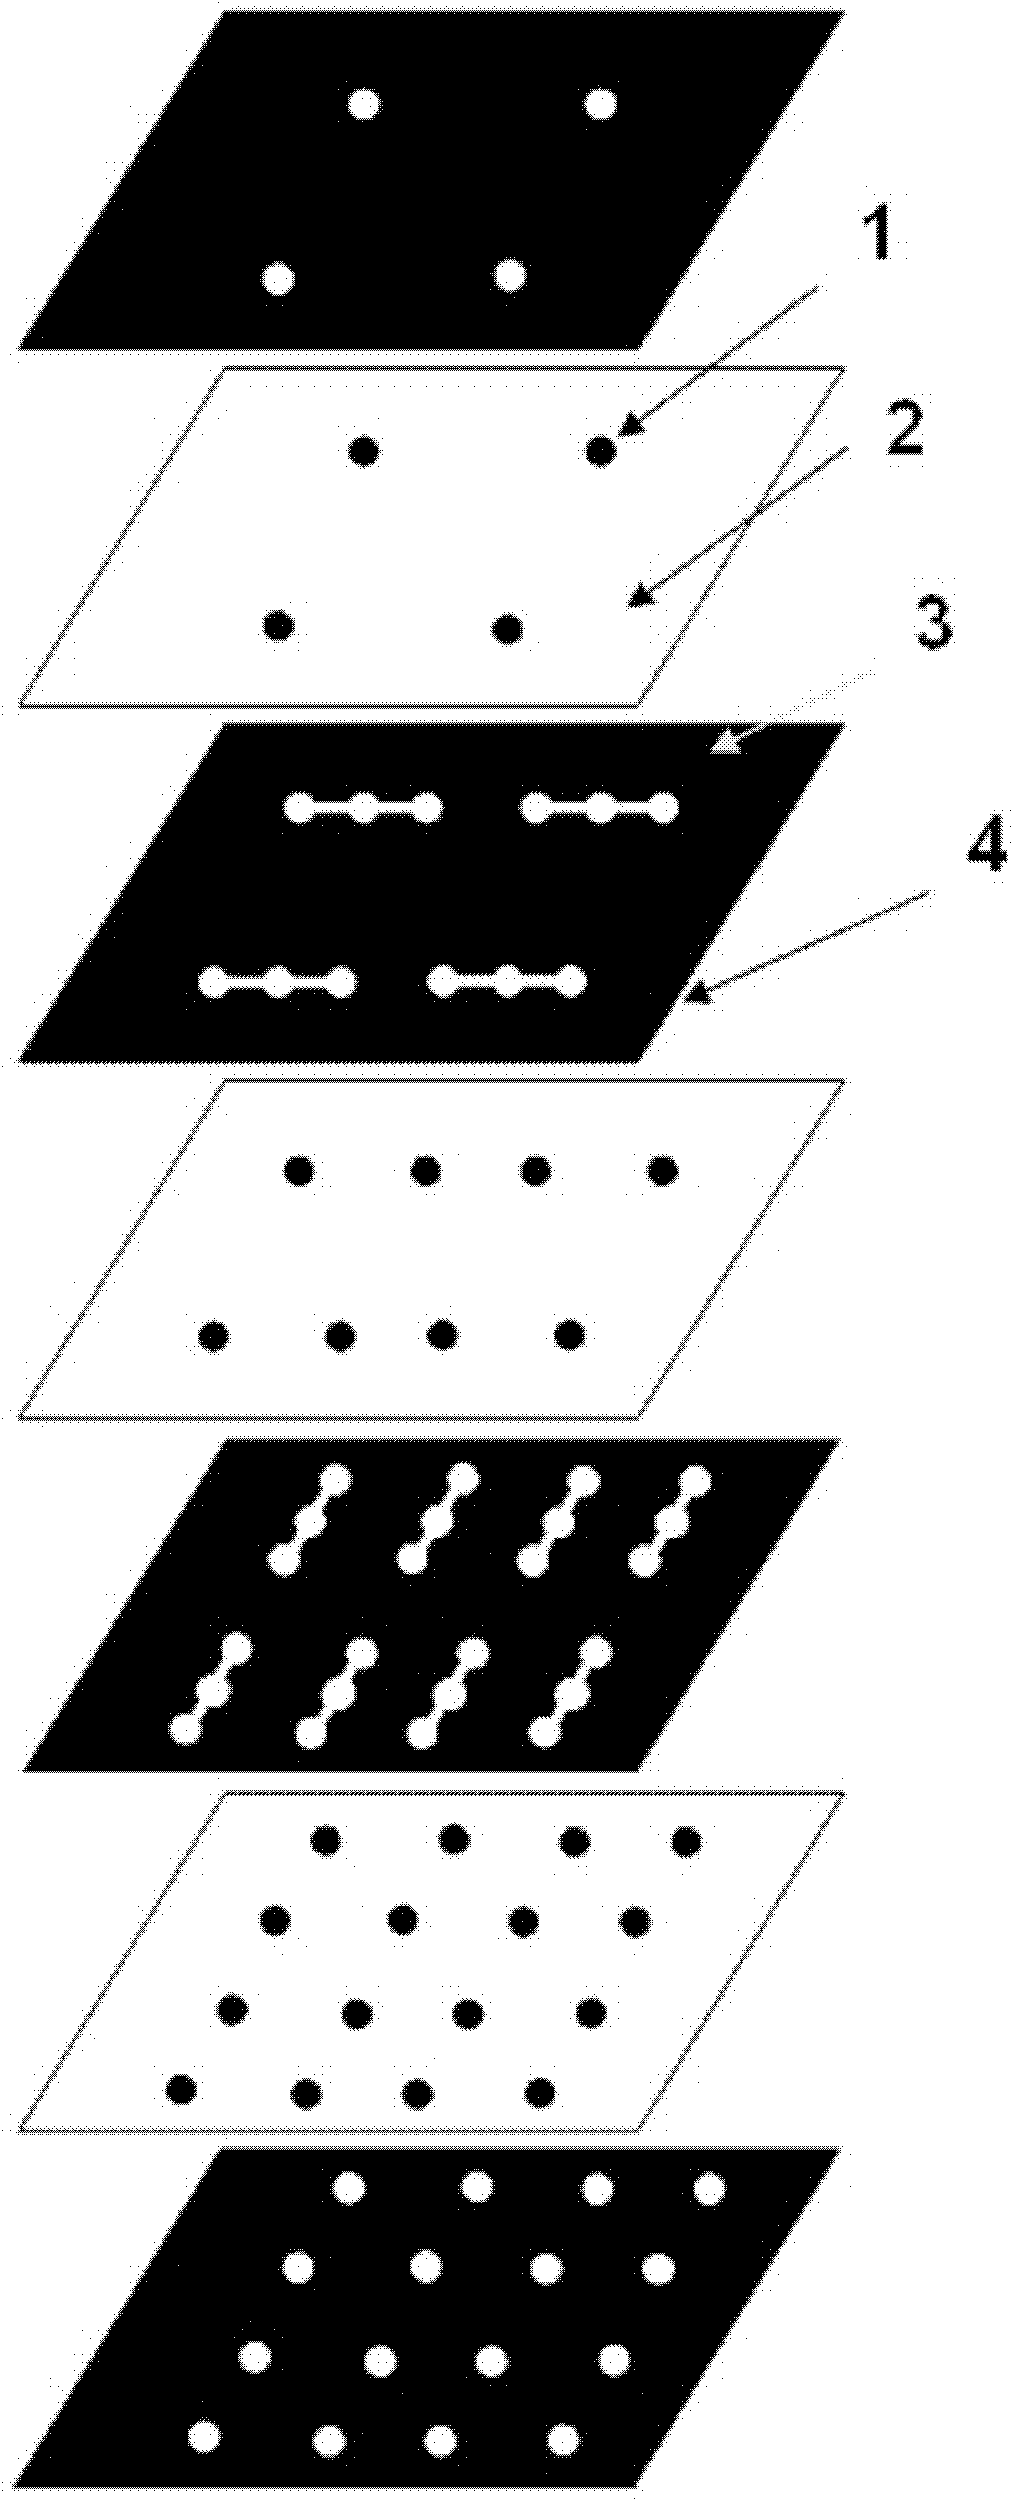 Micro-fluidic paper chip for simultaneously detecting glucose, uric acid, triglycerides and cholesterols, and its manufacturing method